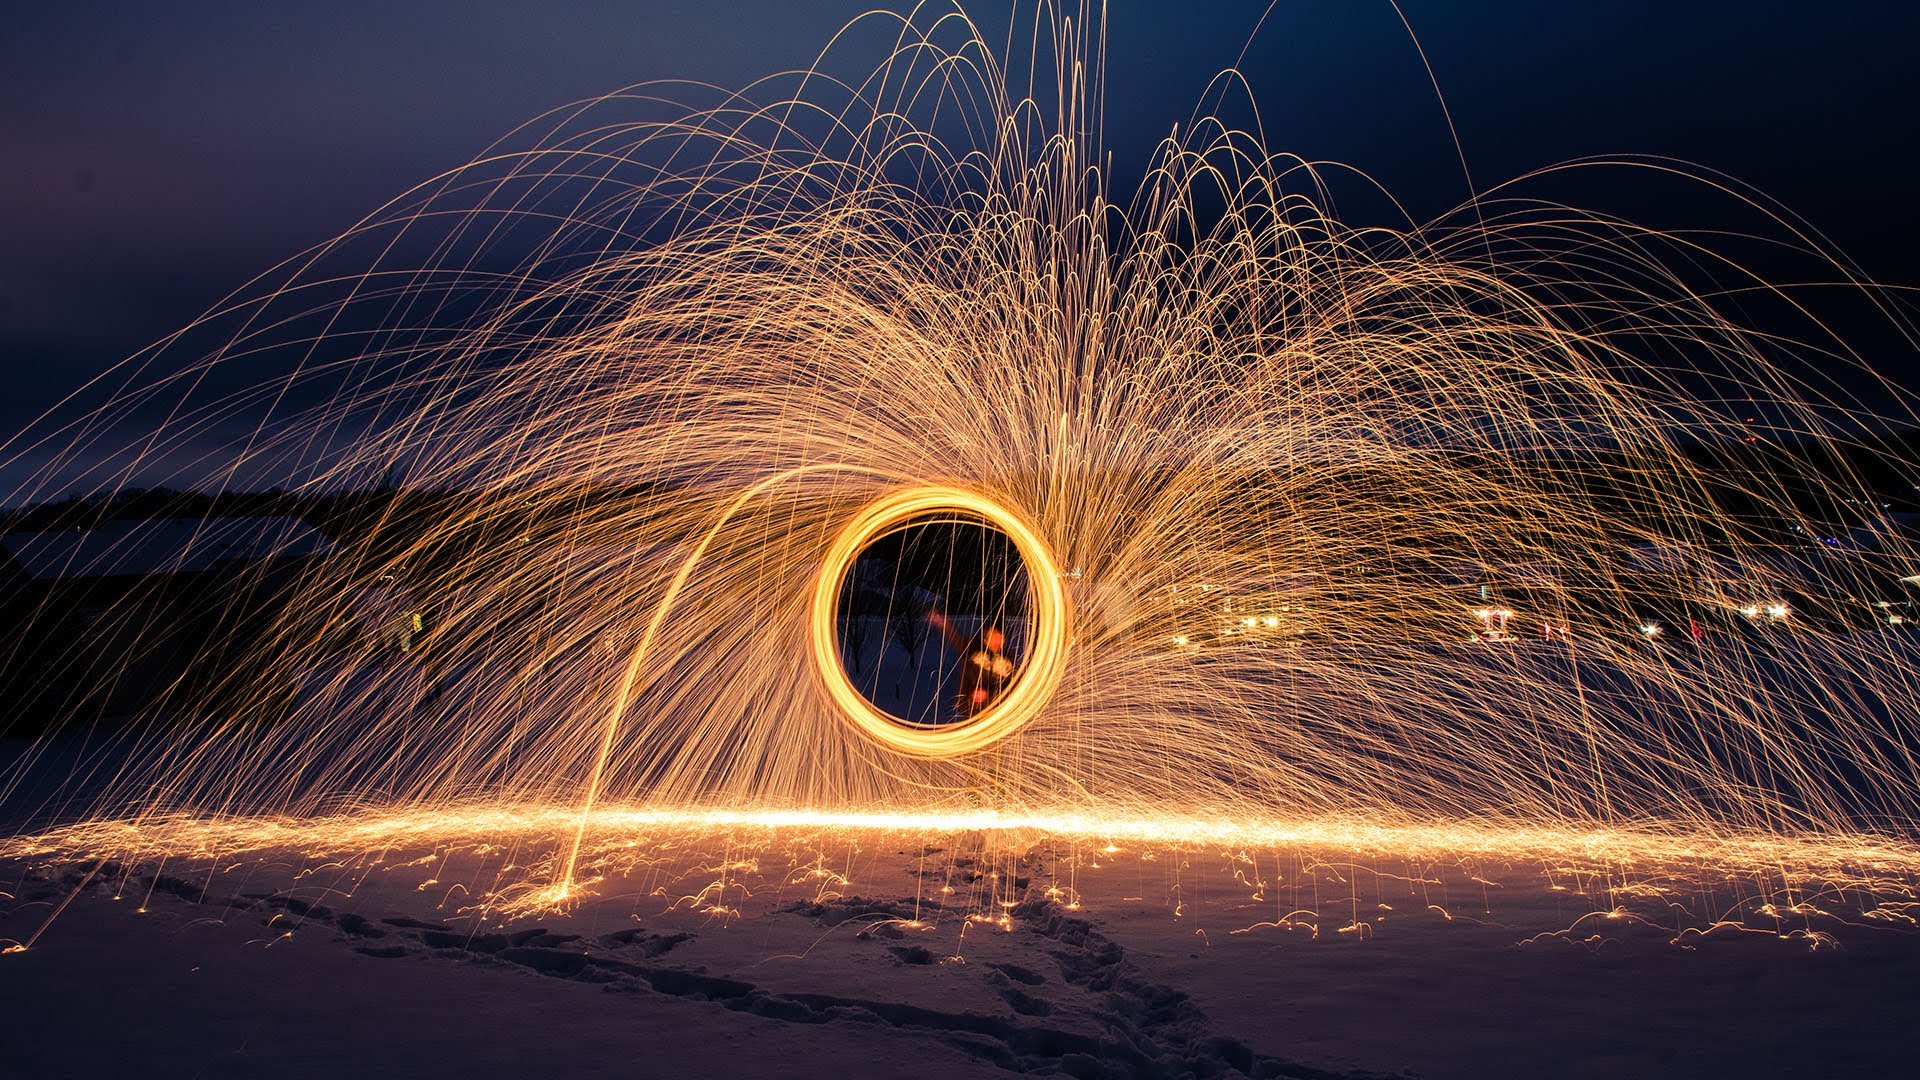 HOW TO: Steel Wool Photography